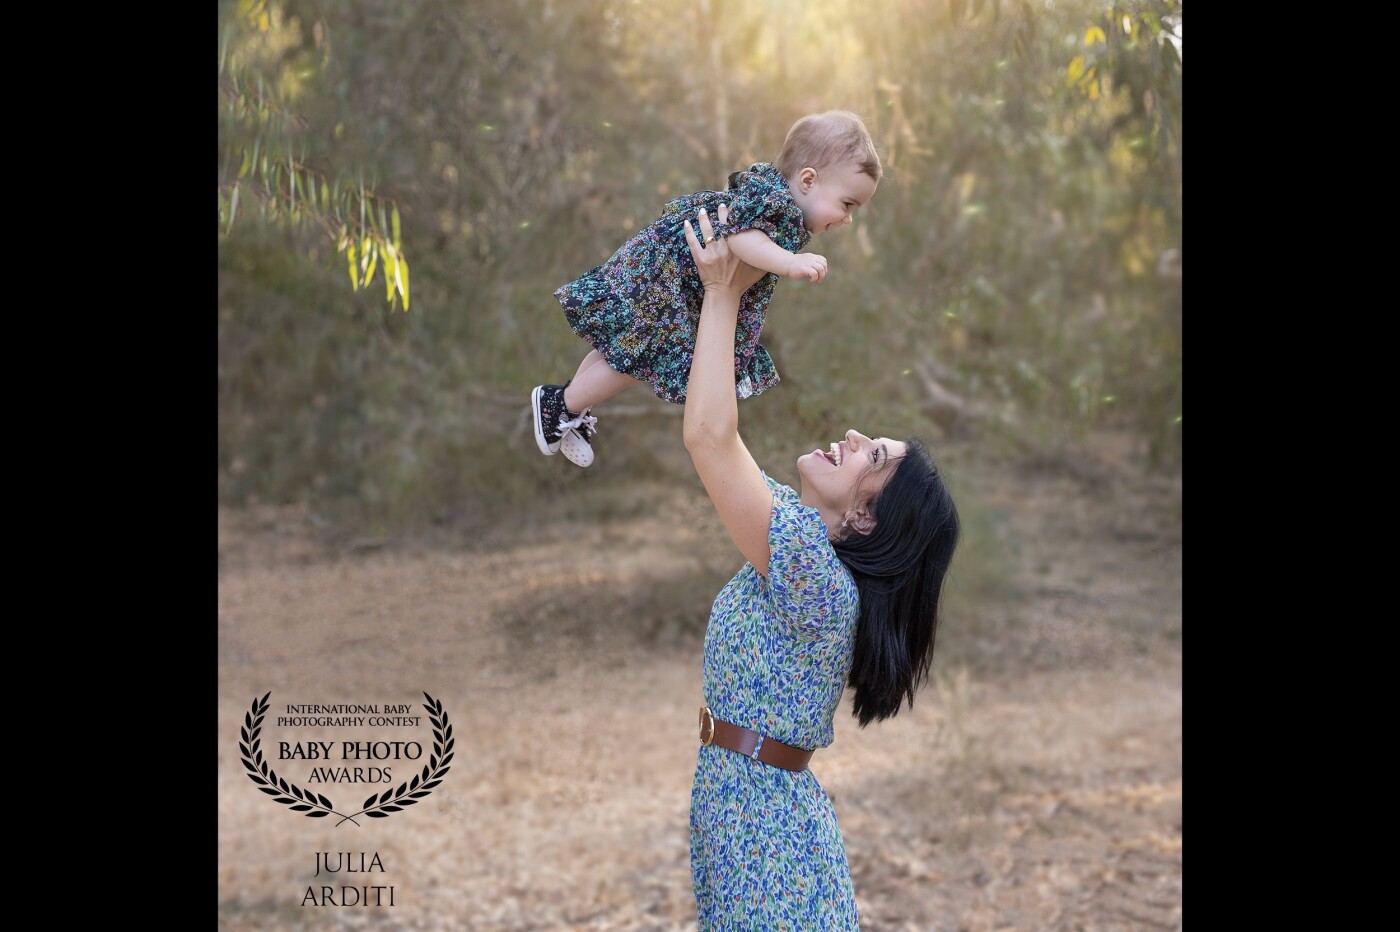 In honor of Gaya's 1st birthday, the parents decided to take a family photo session in nature instead of the traditional cake smash. The truth is - they are absolutely right! A moment of pure happiness right here.